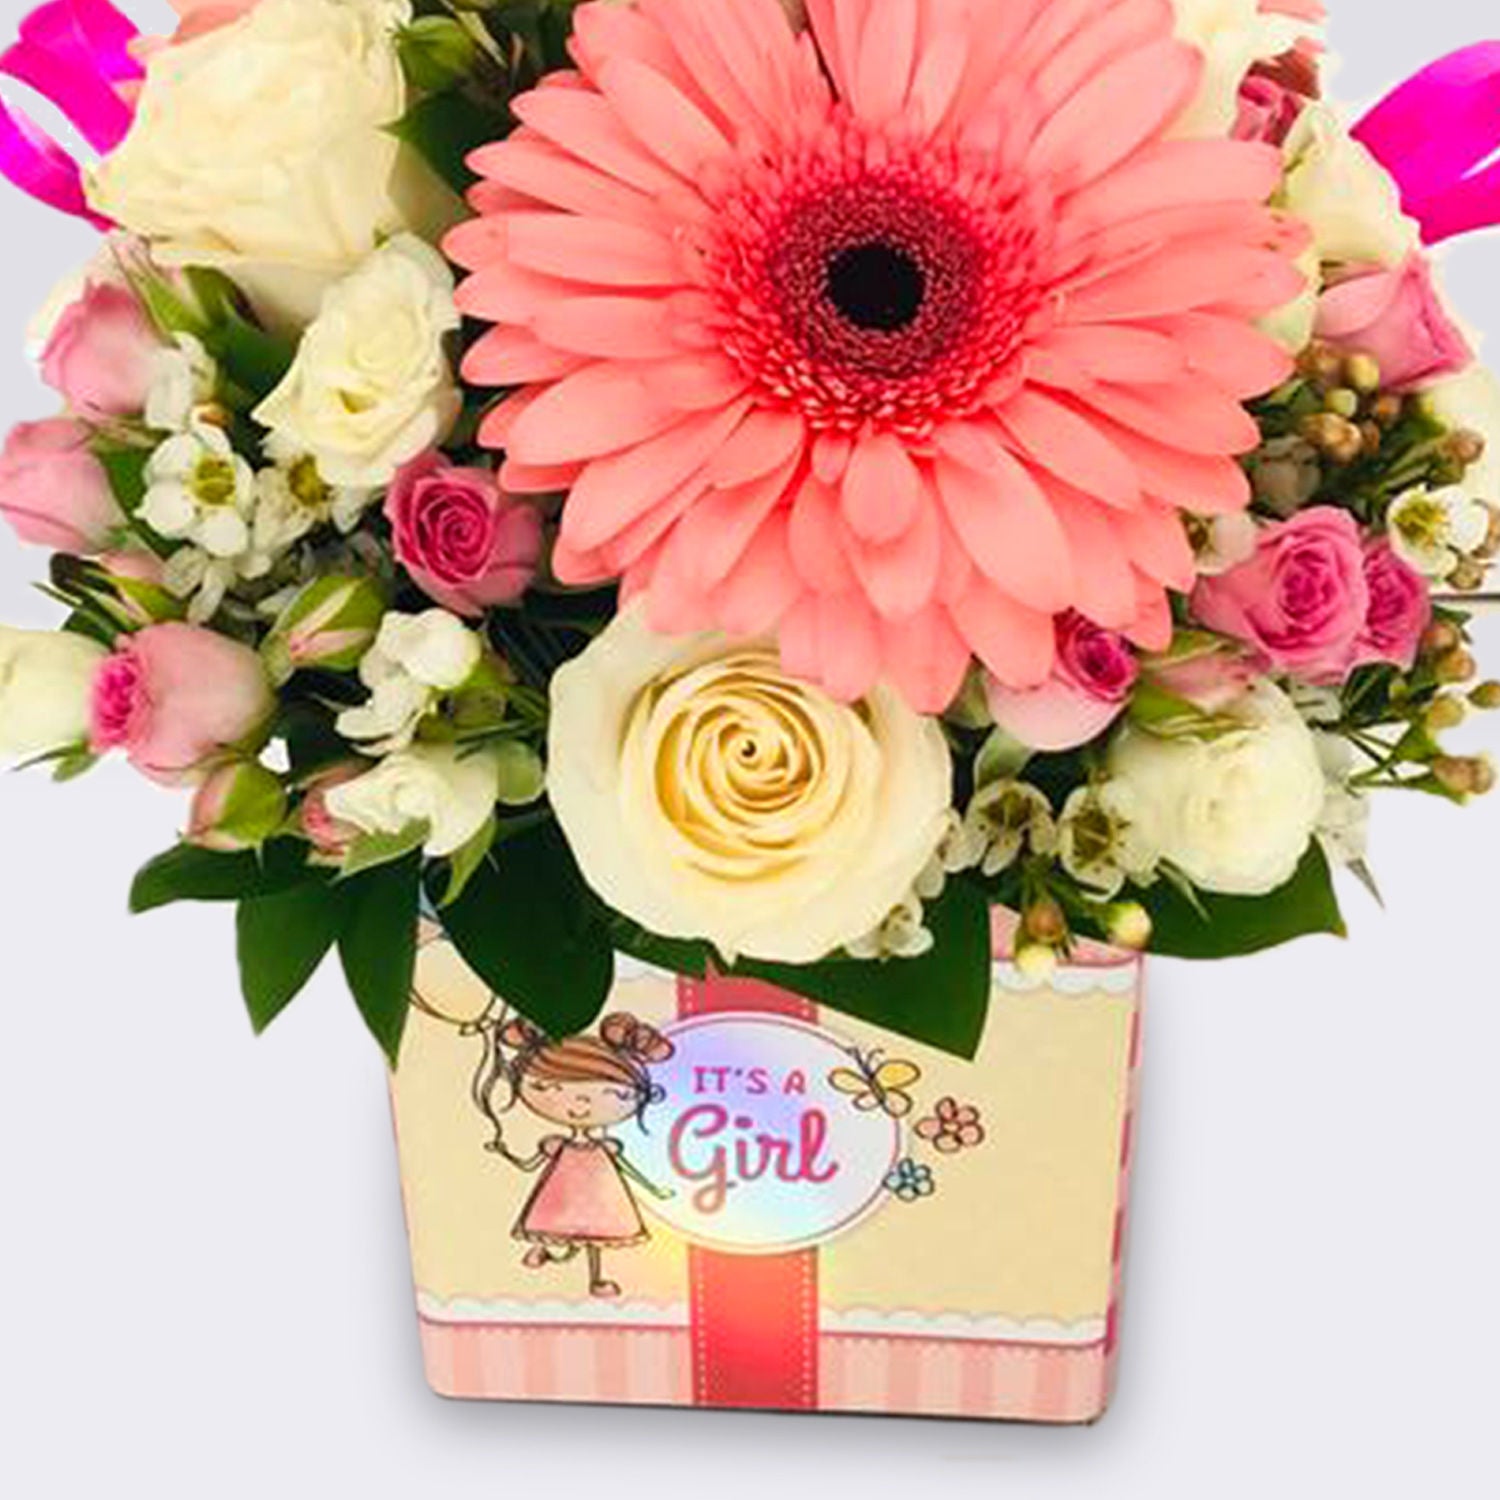 Its A Girl Mix Flowers Vase